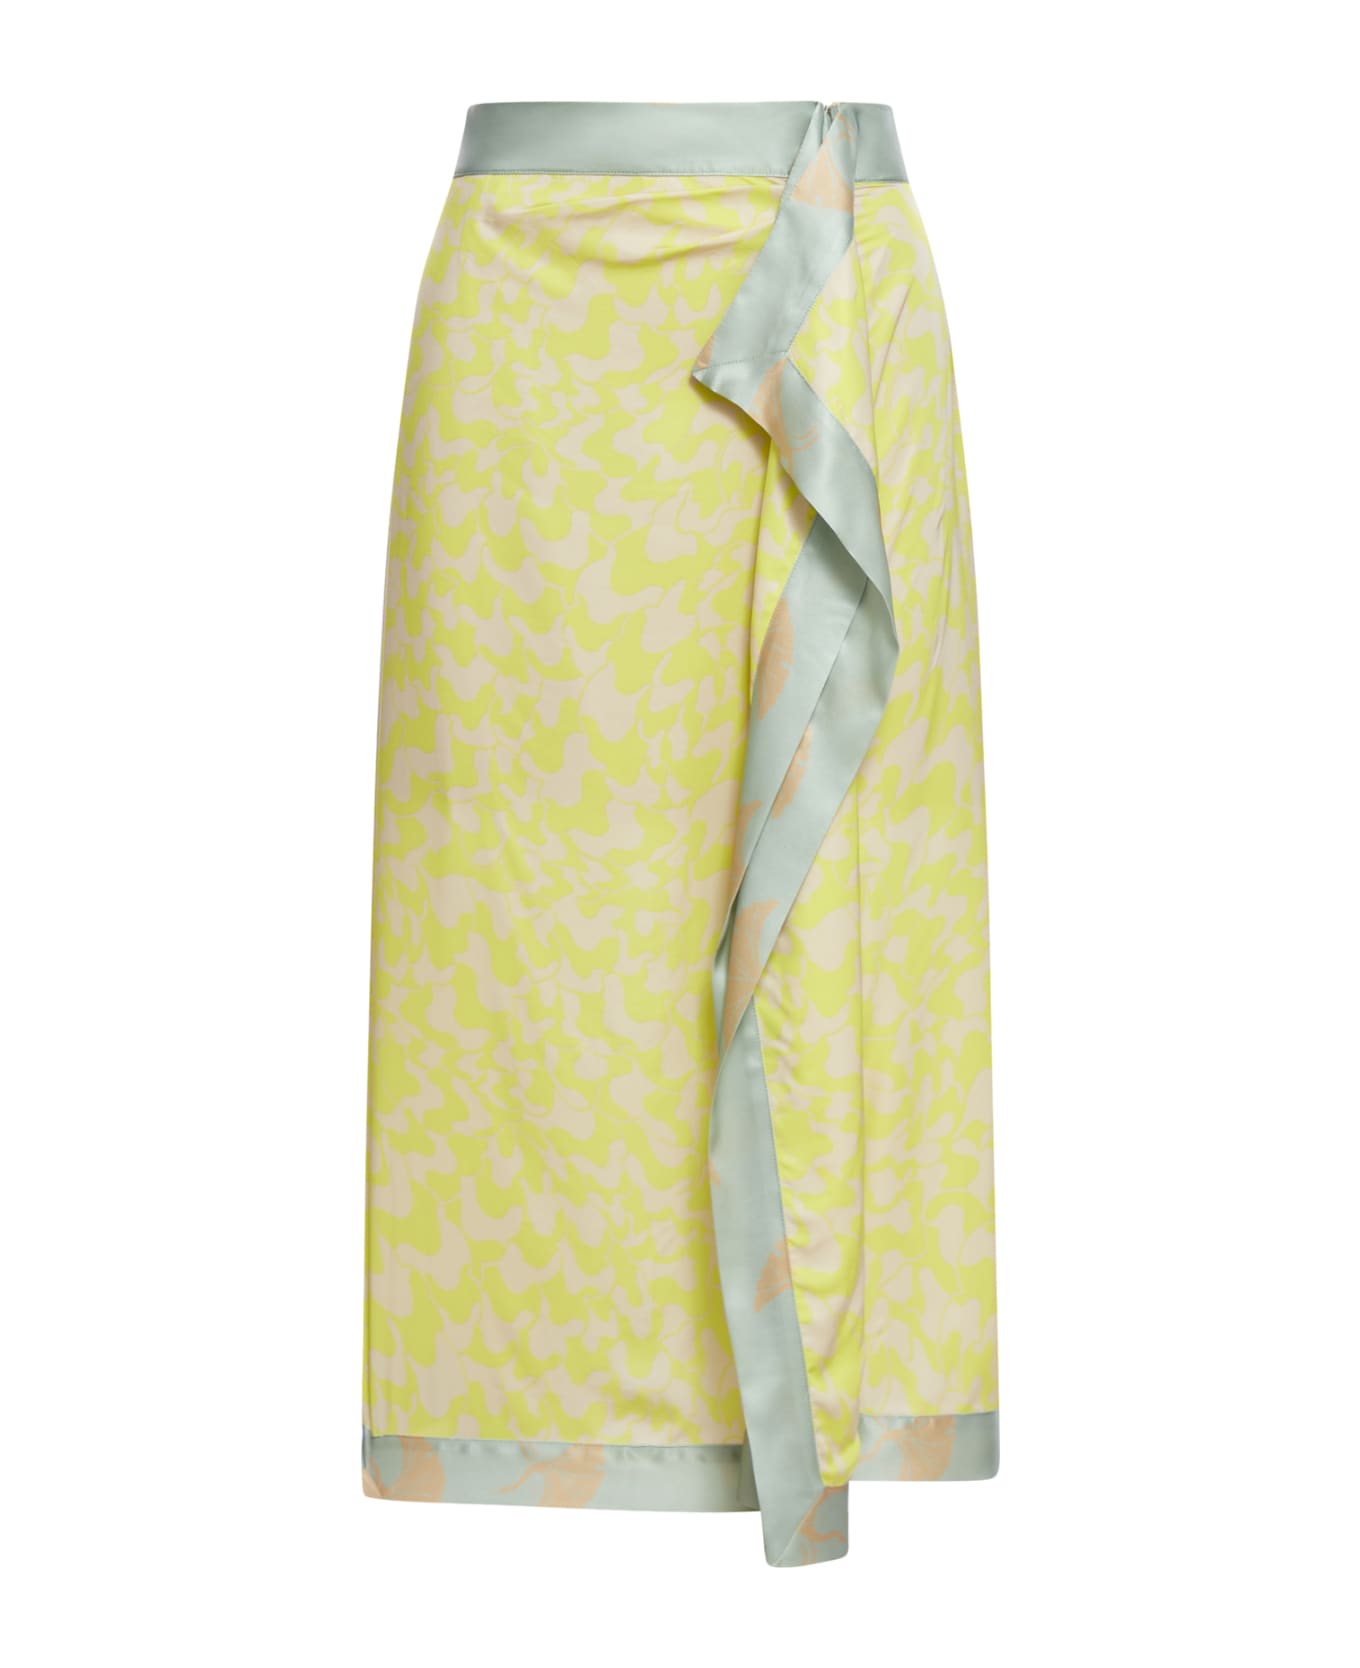 Dries Van Noten 01830-sole Bis 8104 W.w.skirt Lightweight Viscose Printed With Bicolor Abstract Pattern - Yellow